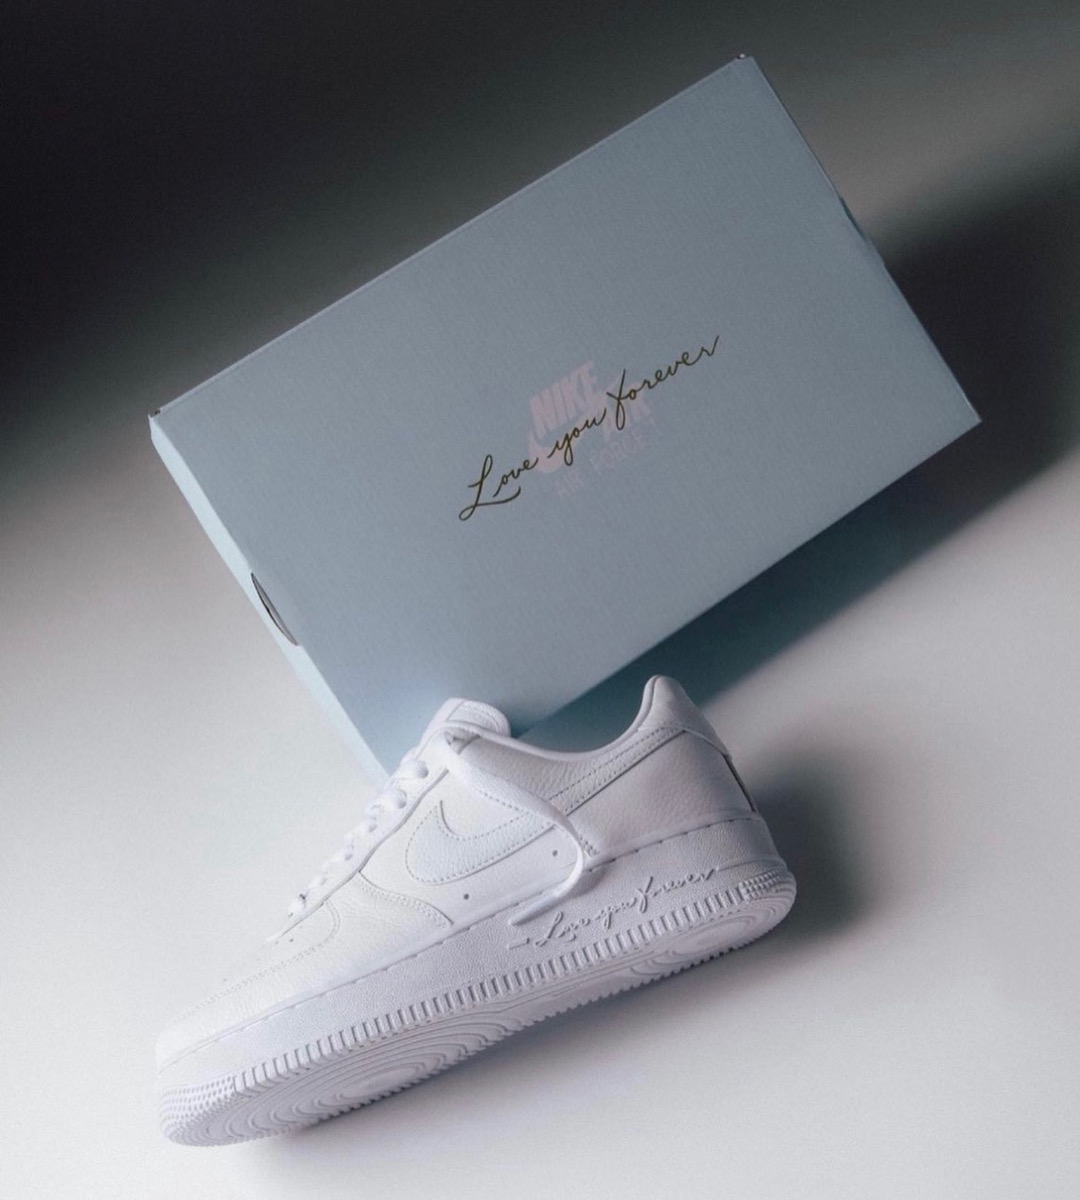 Drake Nocta × Nike Air Force 1 Low SP “Certified Lover Boy”が国内